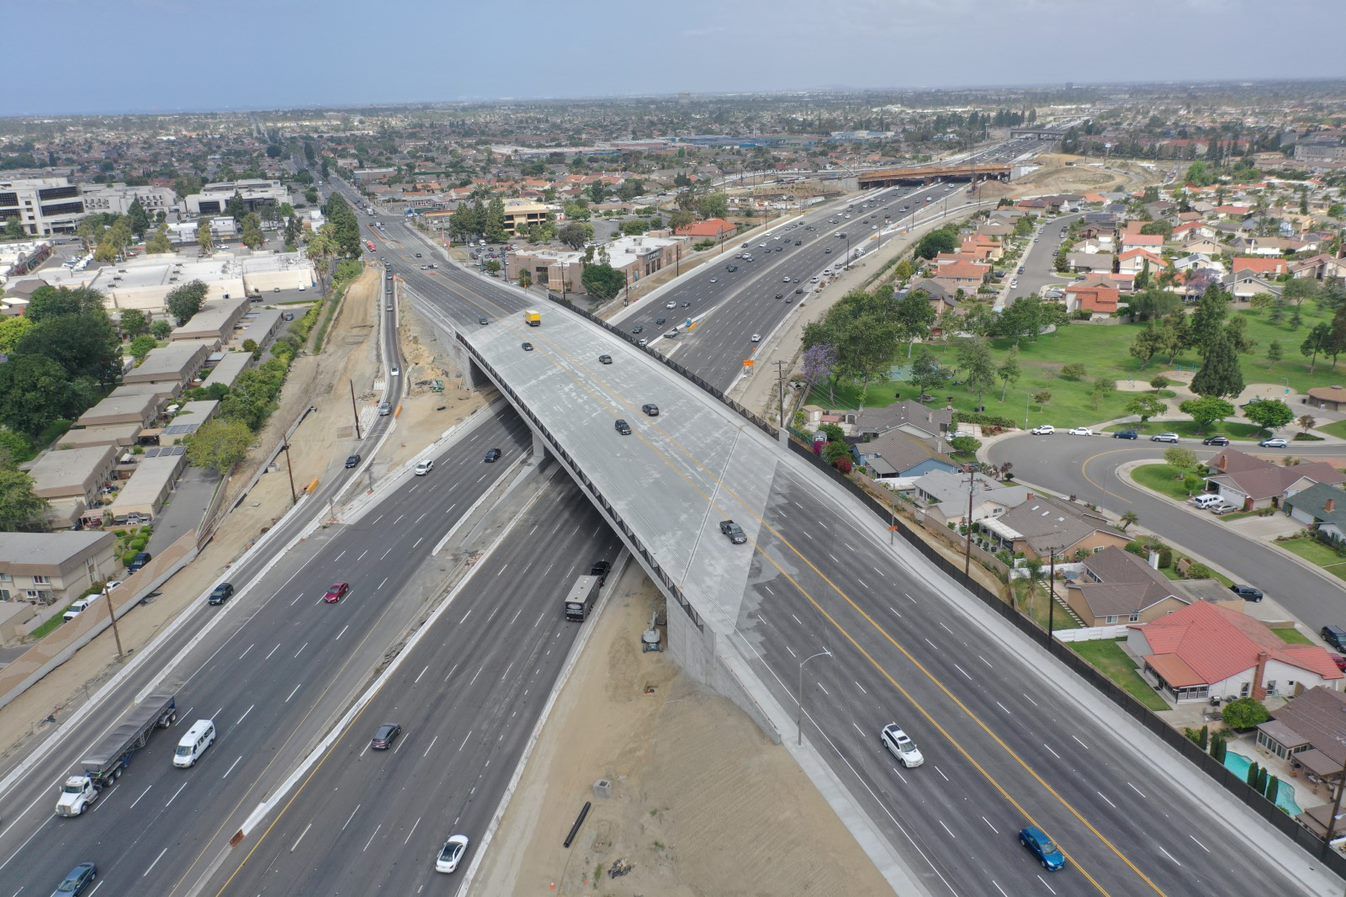 405 fwy closure today